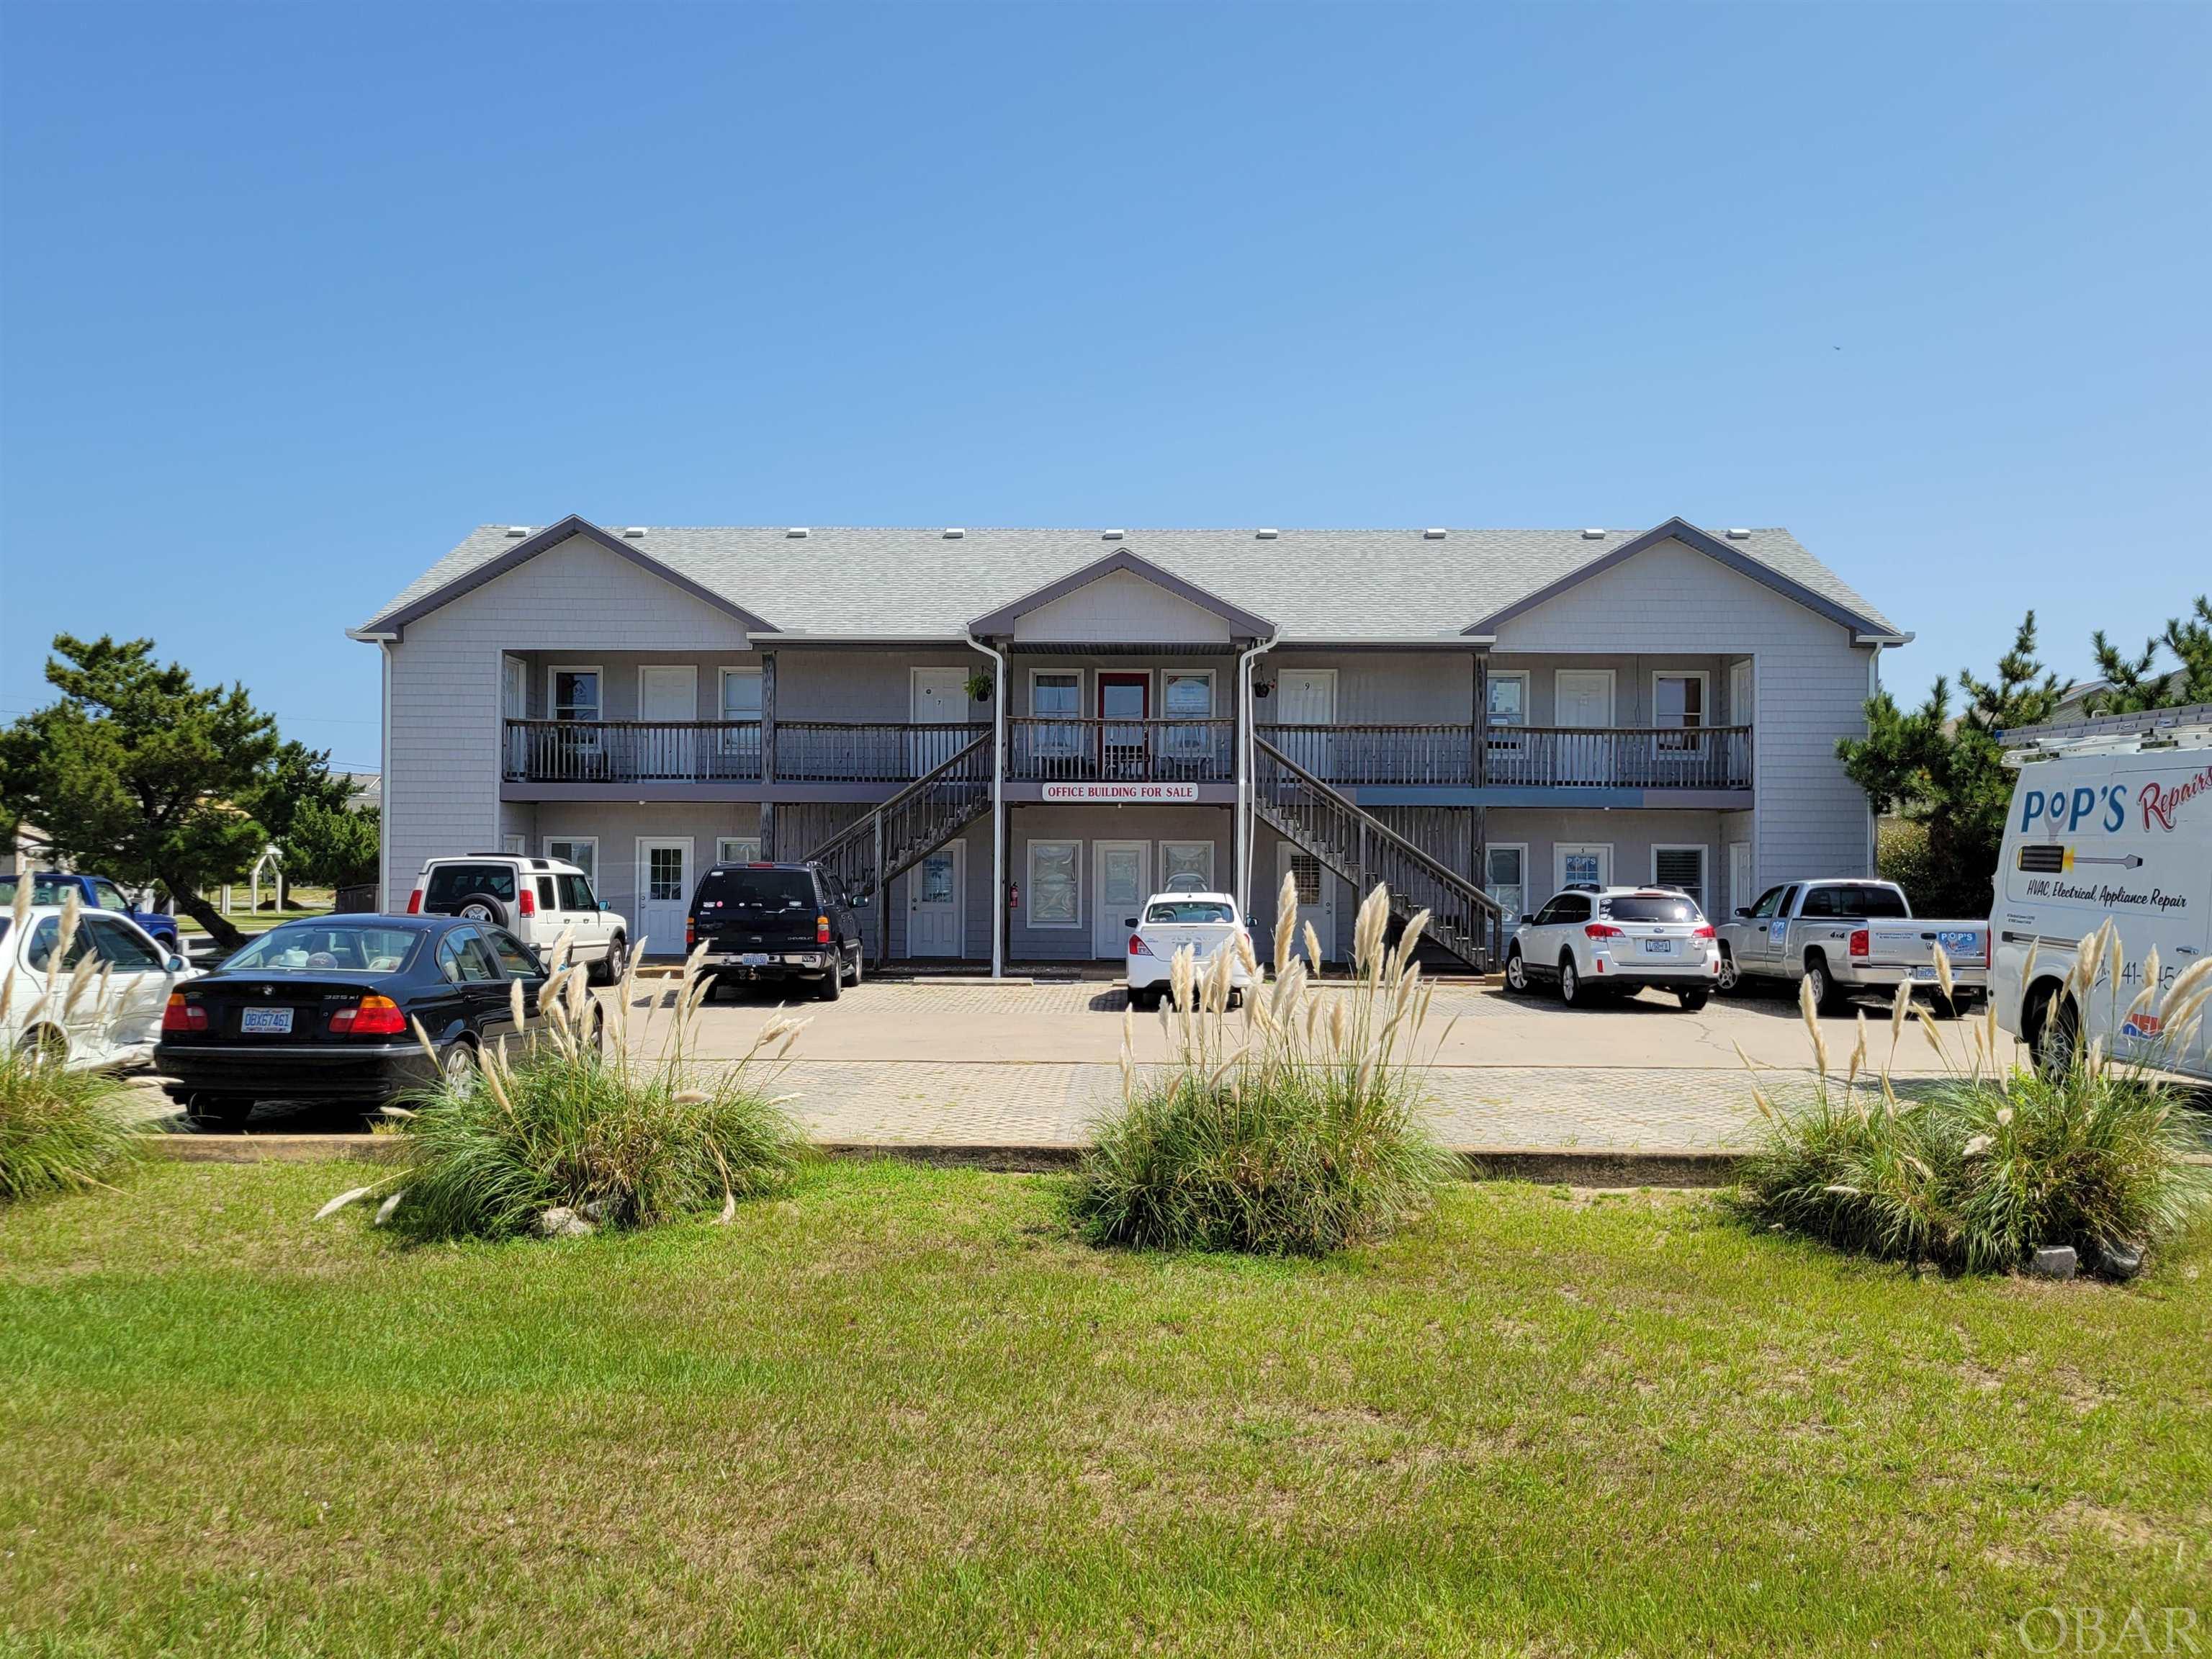 Exceptionally clean and well maintained commercial office space.  10 Unit office space, 100% occupied… all the work is done!  Located in Kill Devil Hills on the east side of the 158 Bypass this building consists of 5 ground floor units and 5 second floor units.  All units have front and rear doors, and side by side spaces can interconnect.  Currently 7 different businesses occupy all 10 units and everyone is happy and wants to stay!  Tenants pay for electricity and cable, owner pays all other utilities and taxes.  Owner financing available; 10% down; 4% interest; 30 year term with a 10 year balloon payment.